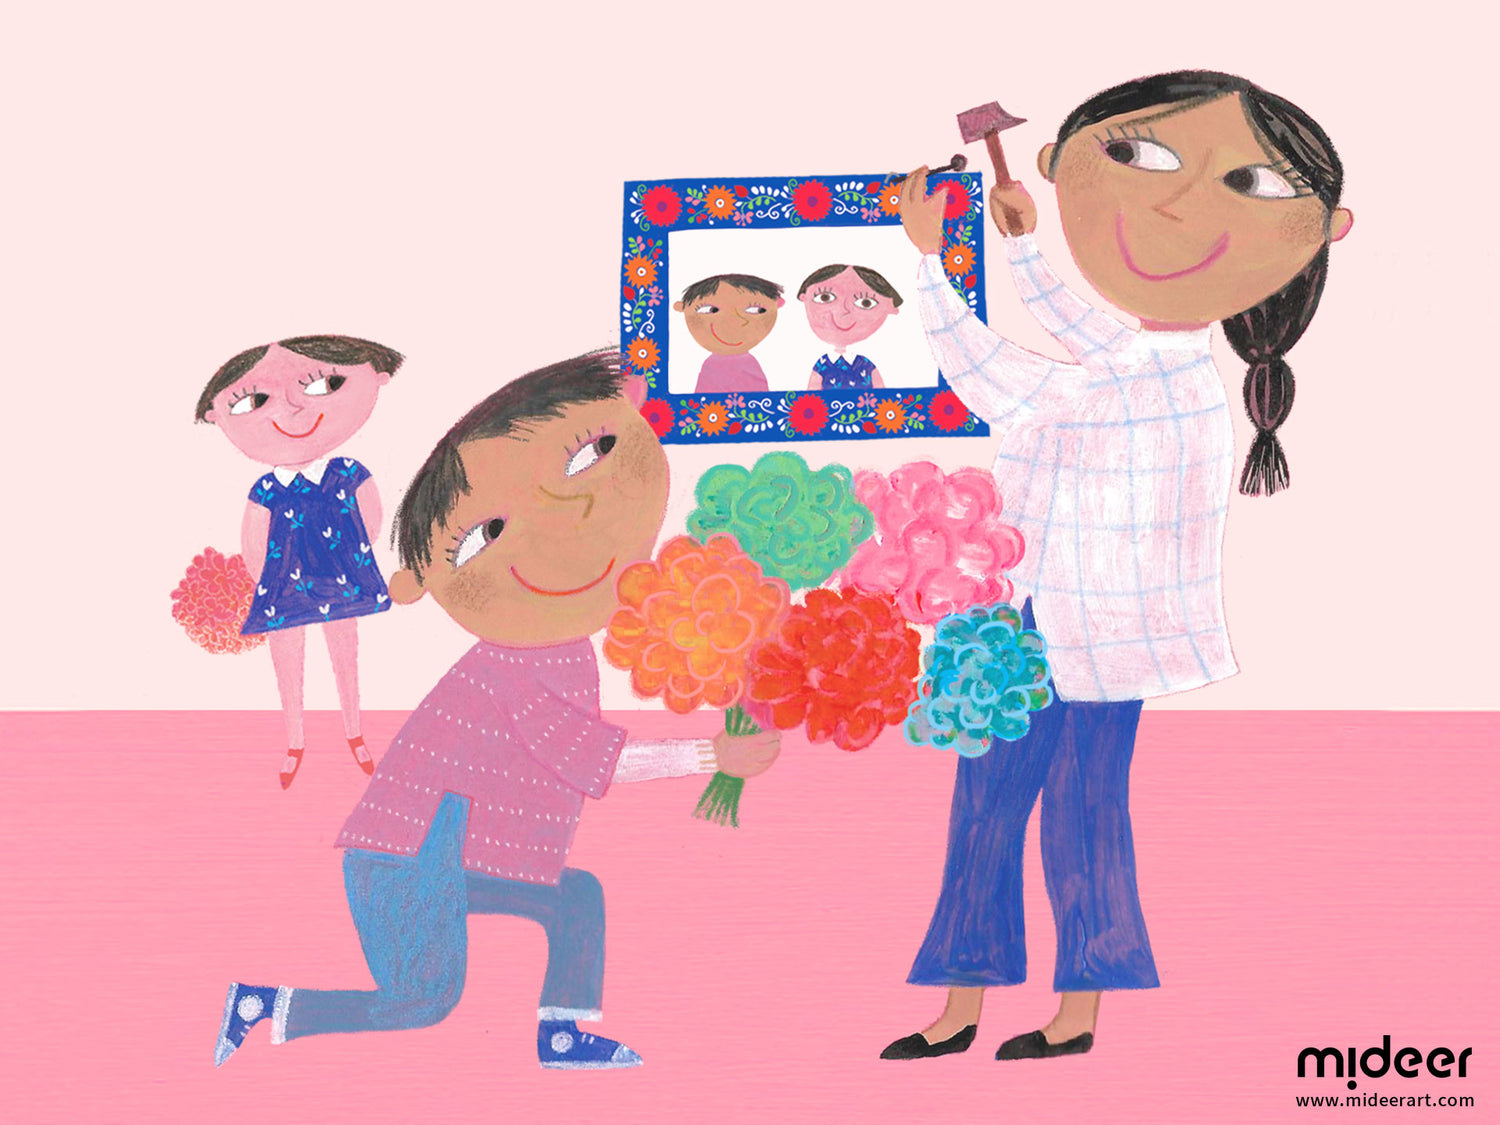 Mother's Day: Family-Friendly Activities to Celebrate Together